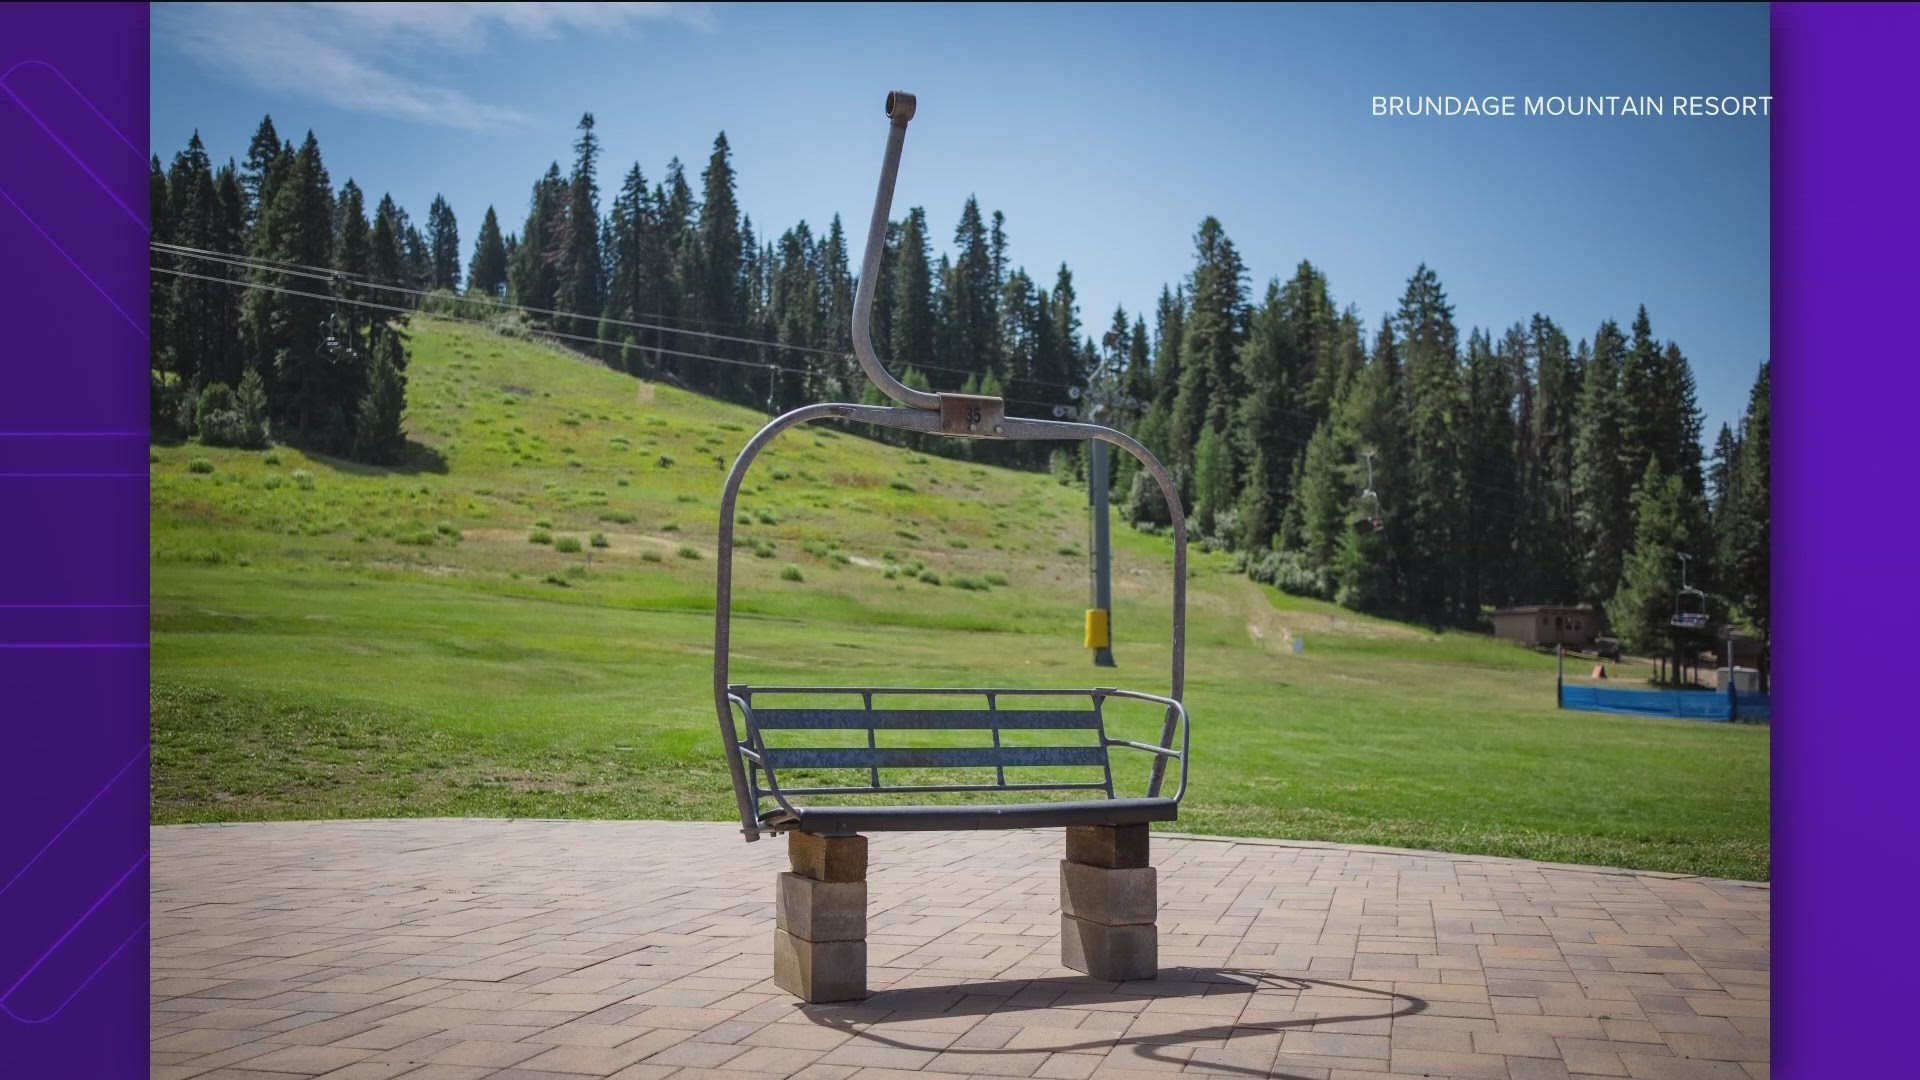 Brundage Mountain Resort is offering 169 of their old three-seat Centennial lift chairs for $800 each during a one-day sale on Saturday, Aug. 5.